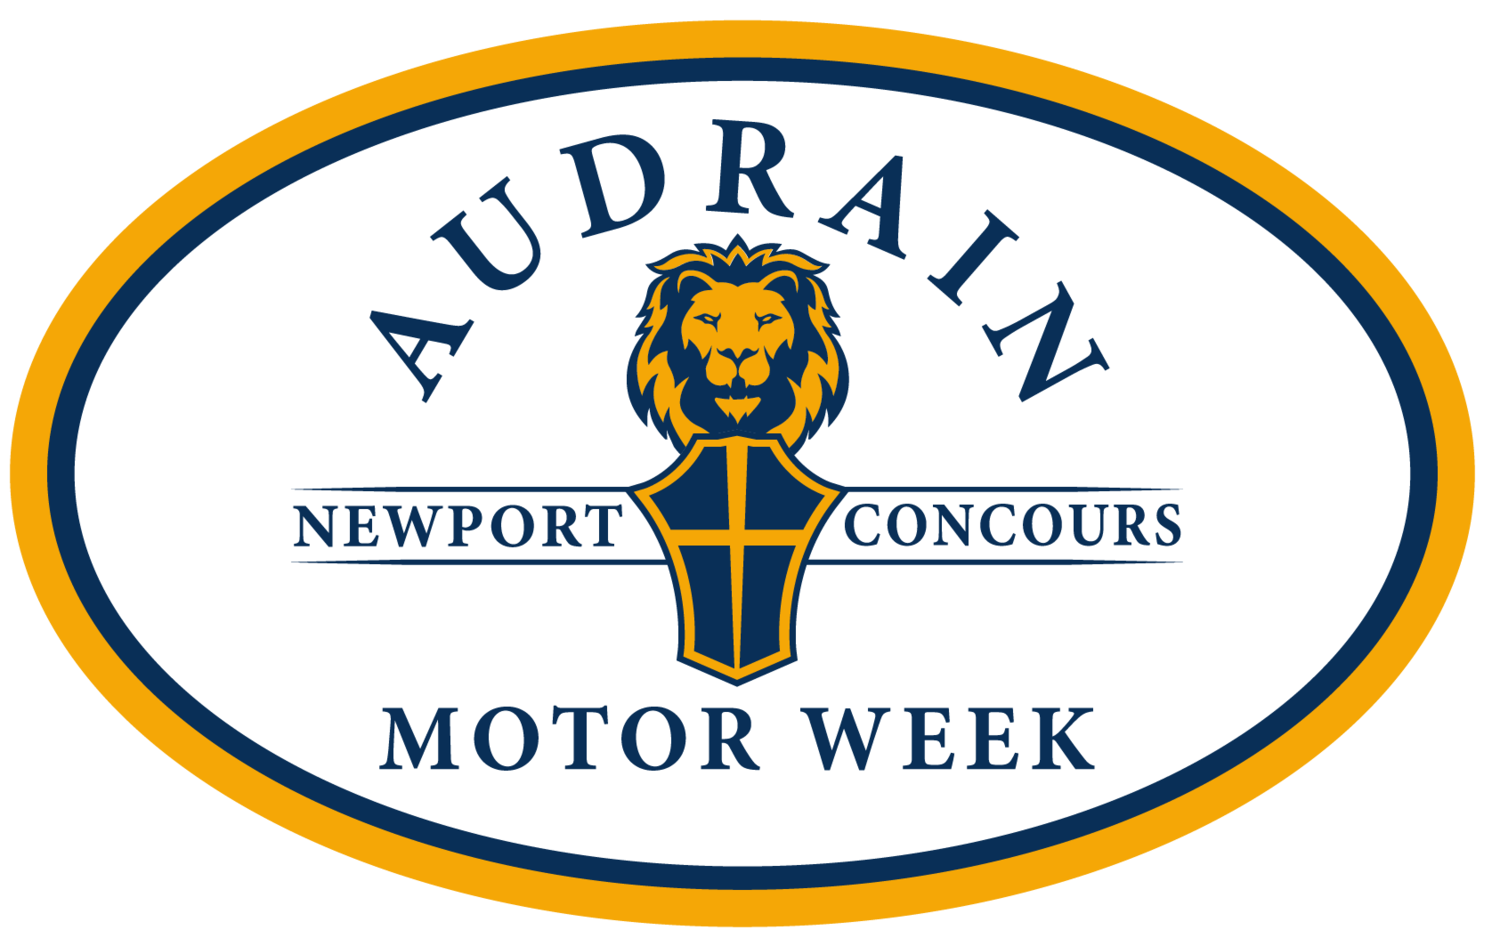 Audrain Newport Concours and Motor Week